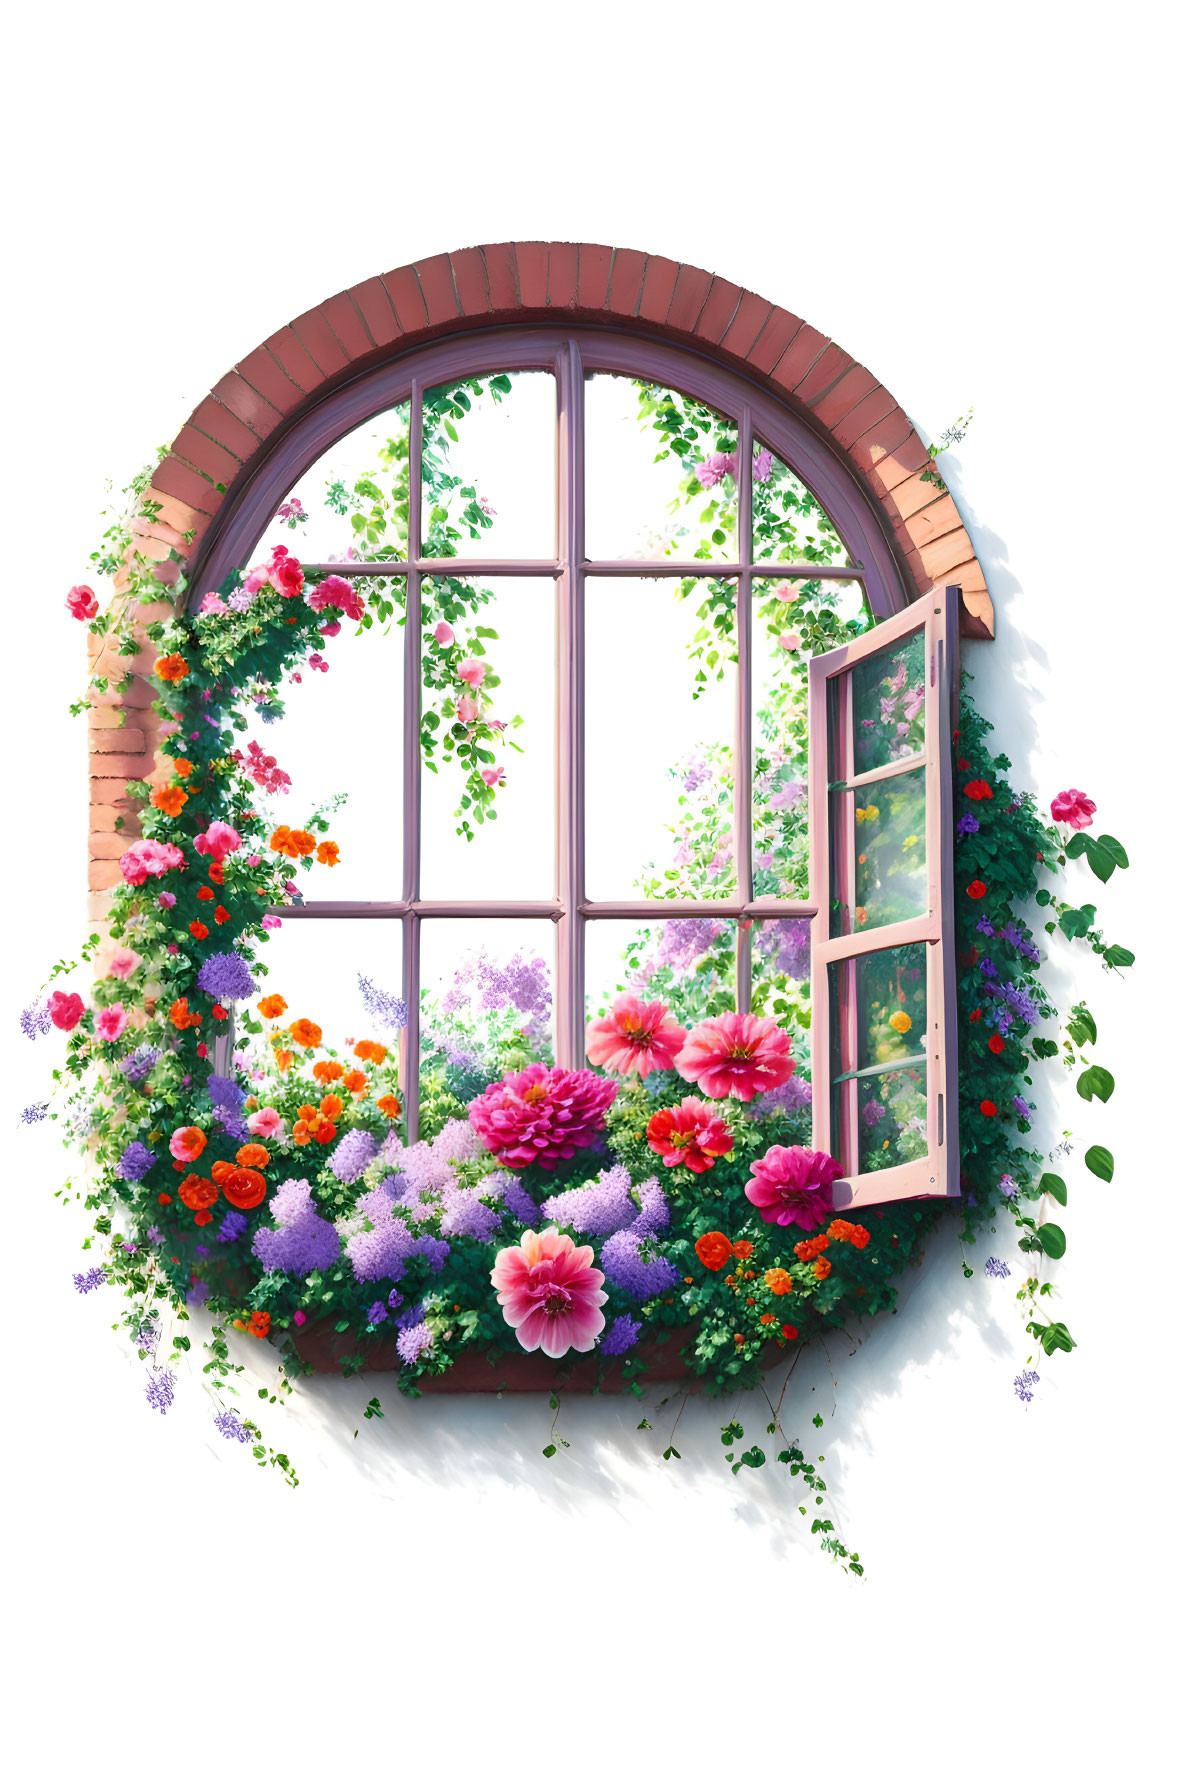 Arched window with open sash amidst lush garden scene